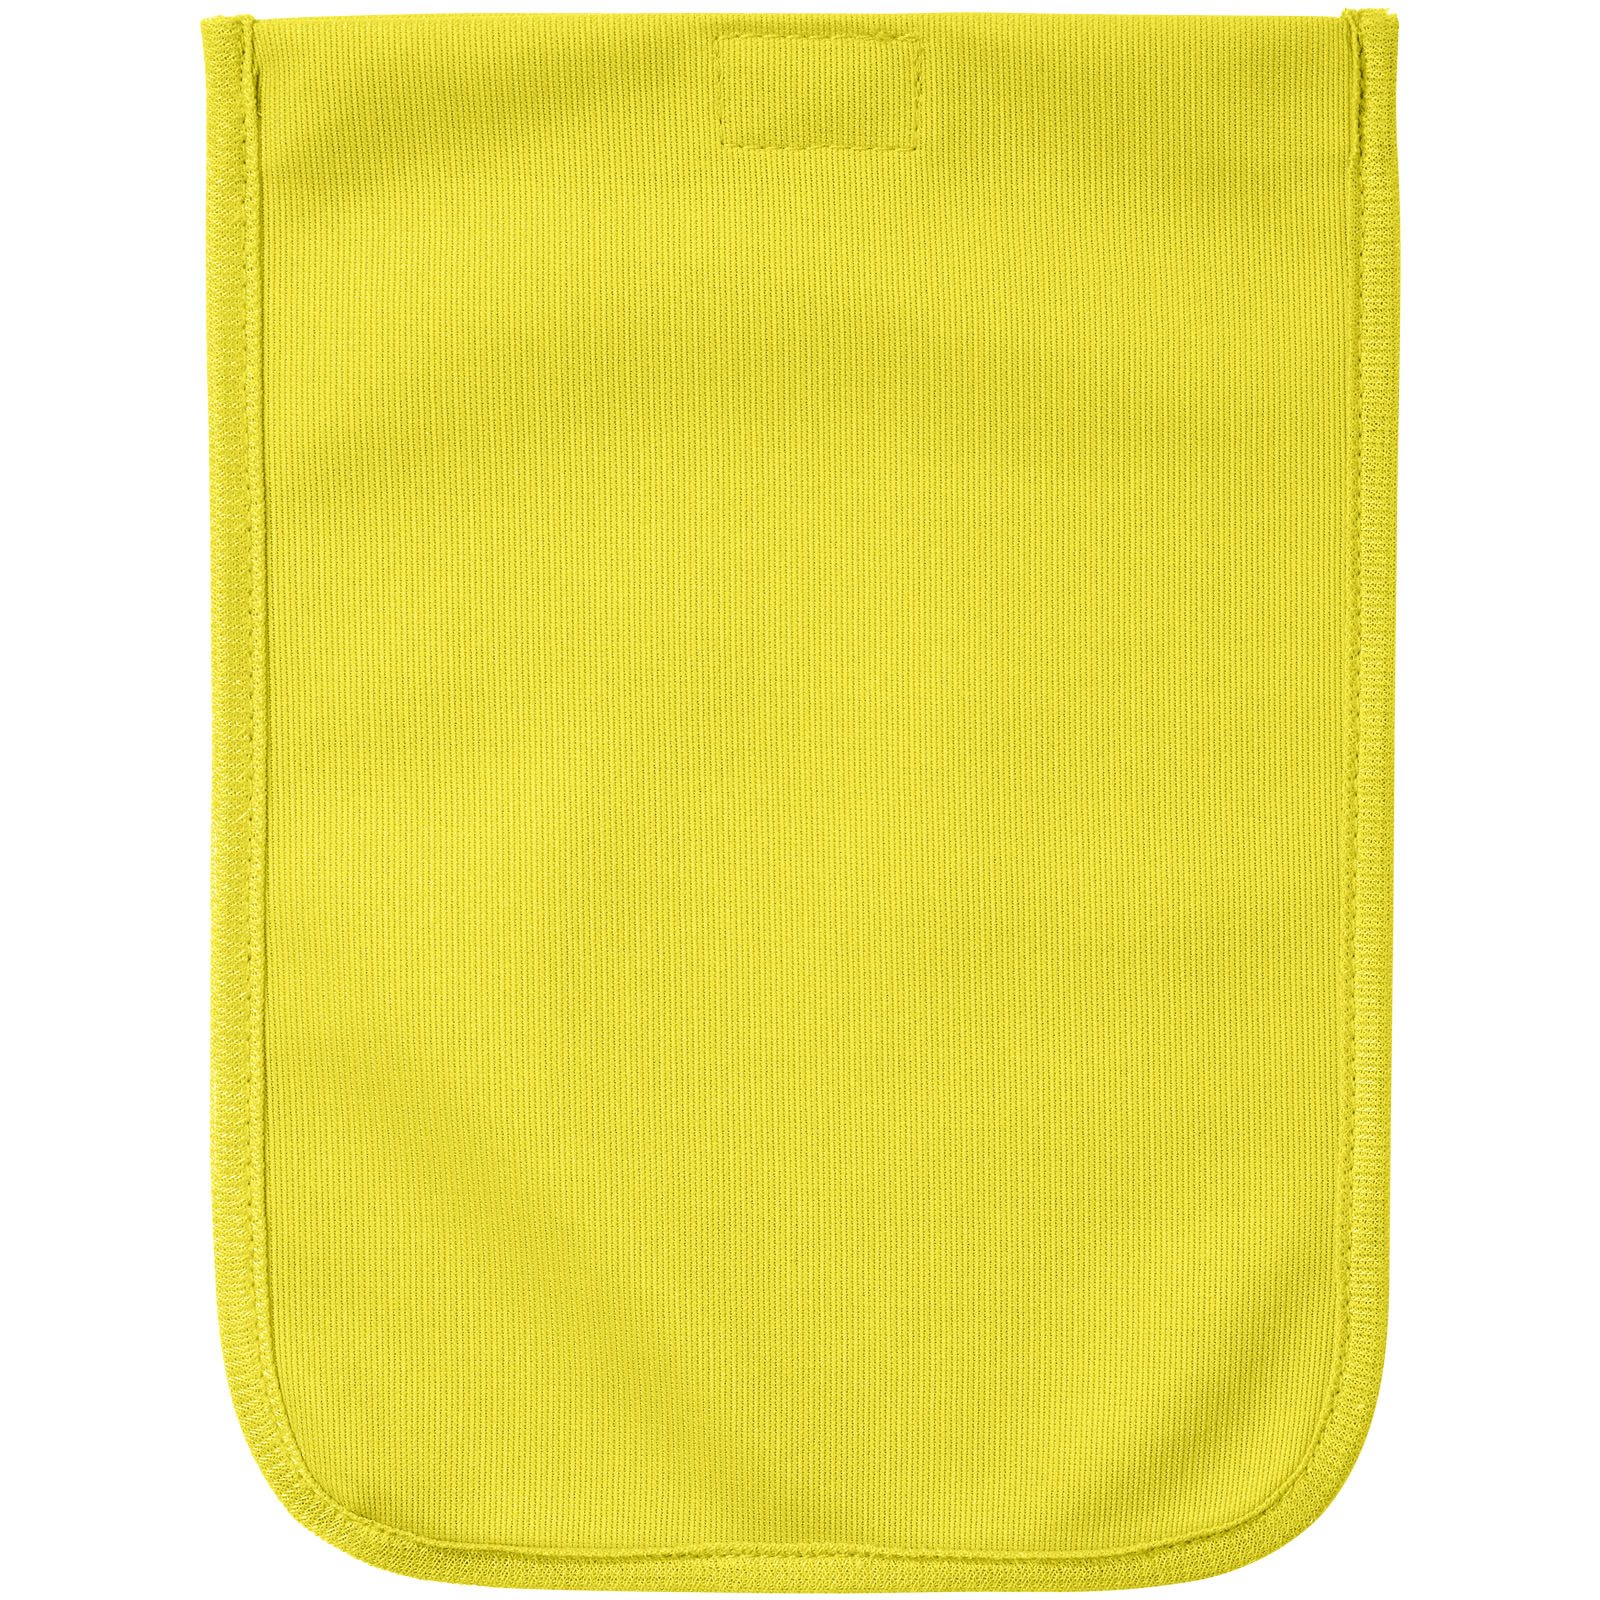 Advertising Safety Vests - RFX™ Watch-out XL safety vest in pouch for professional use - 2